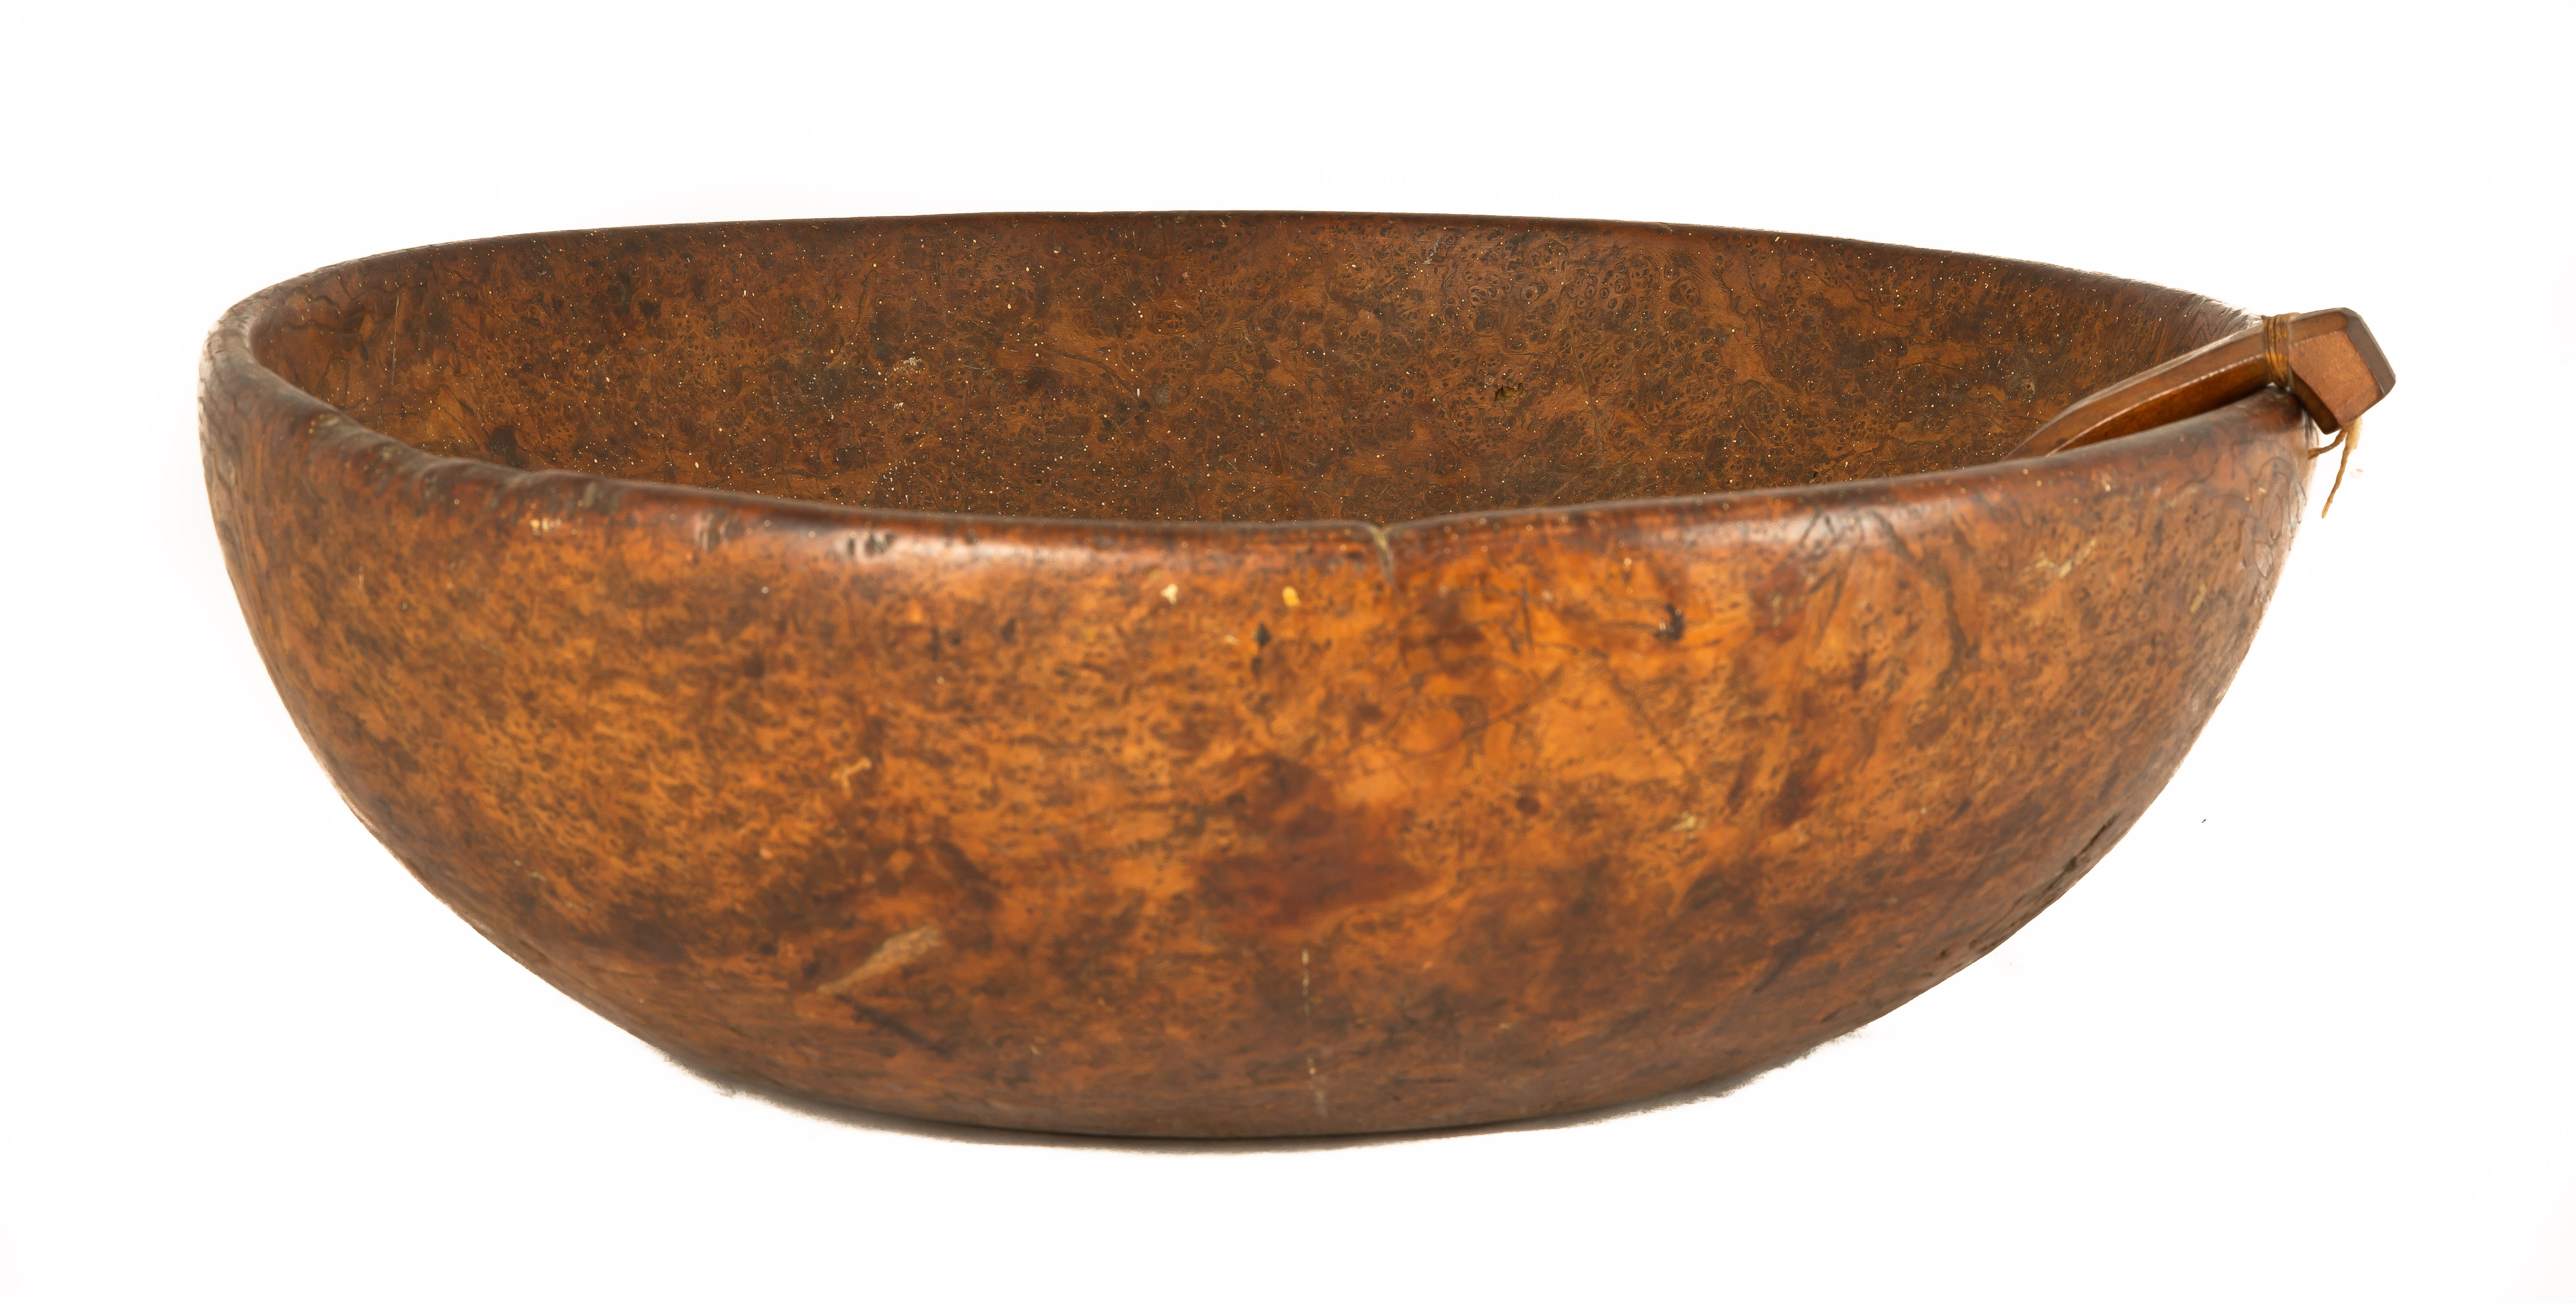 BURL BOWL WITH BUTTER LADLES 19th century.